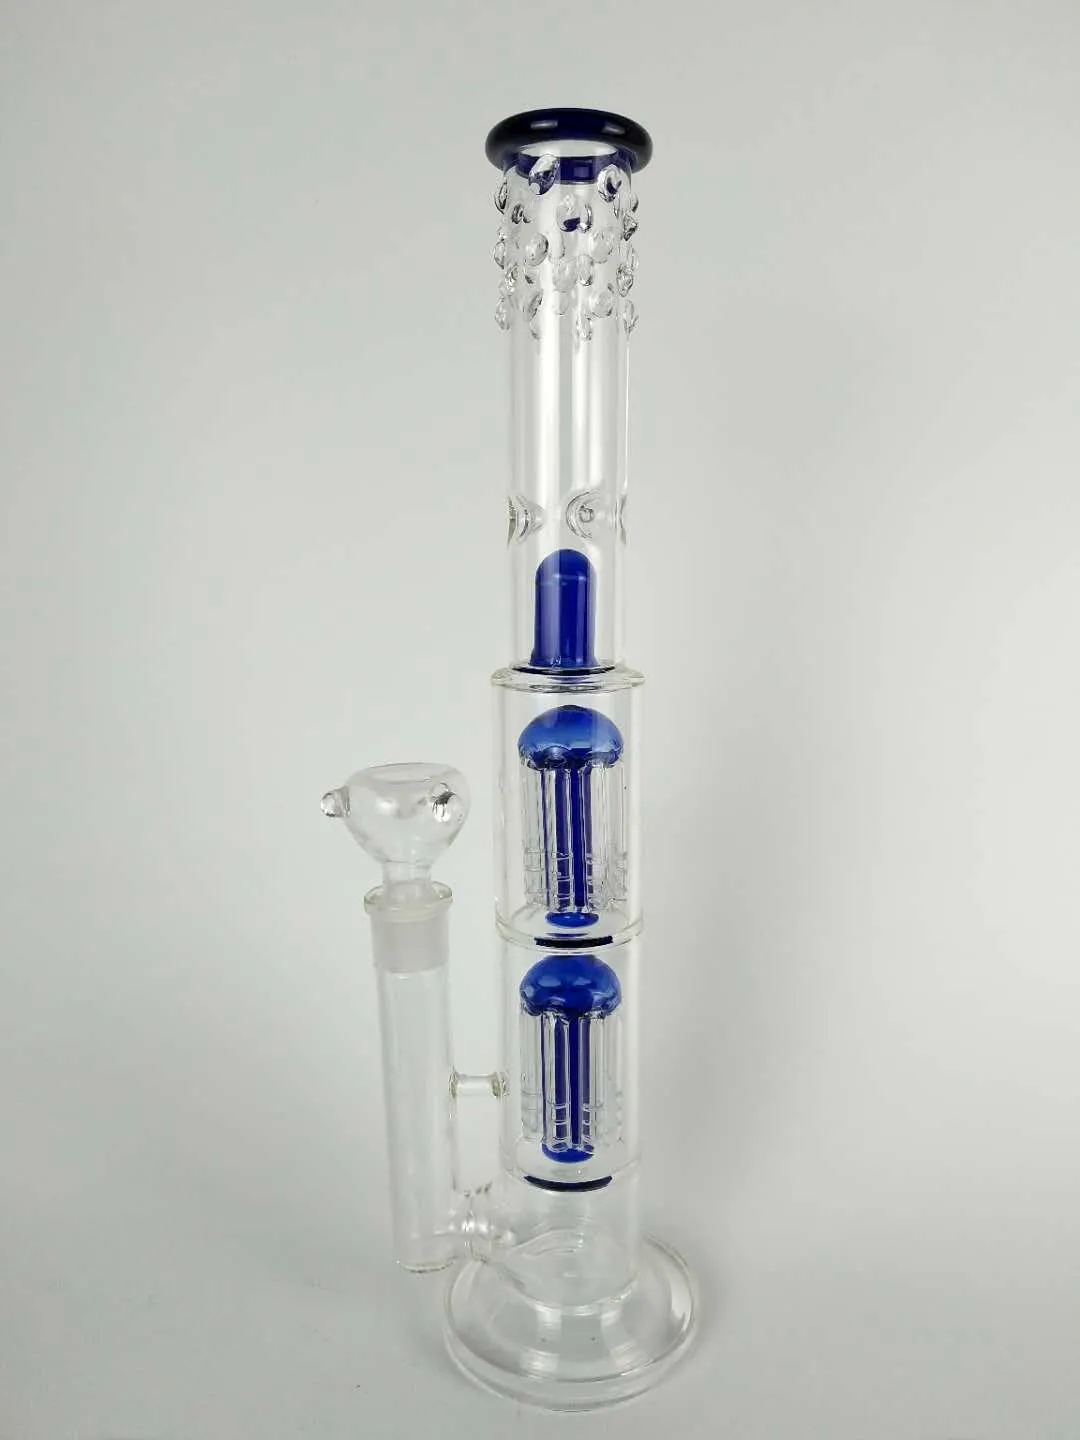 H 16quot Glass Bong Quotspoiled Greenblue Speranzaquot Double Tree Perc Dome Percolator Water Pipe 18mm Bowal Water Pip4186395